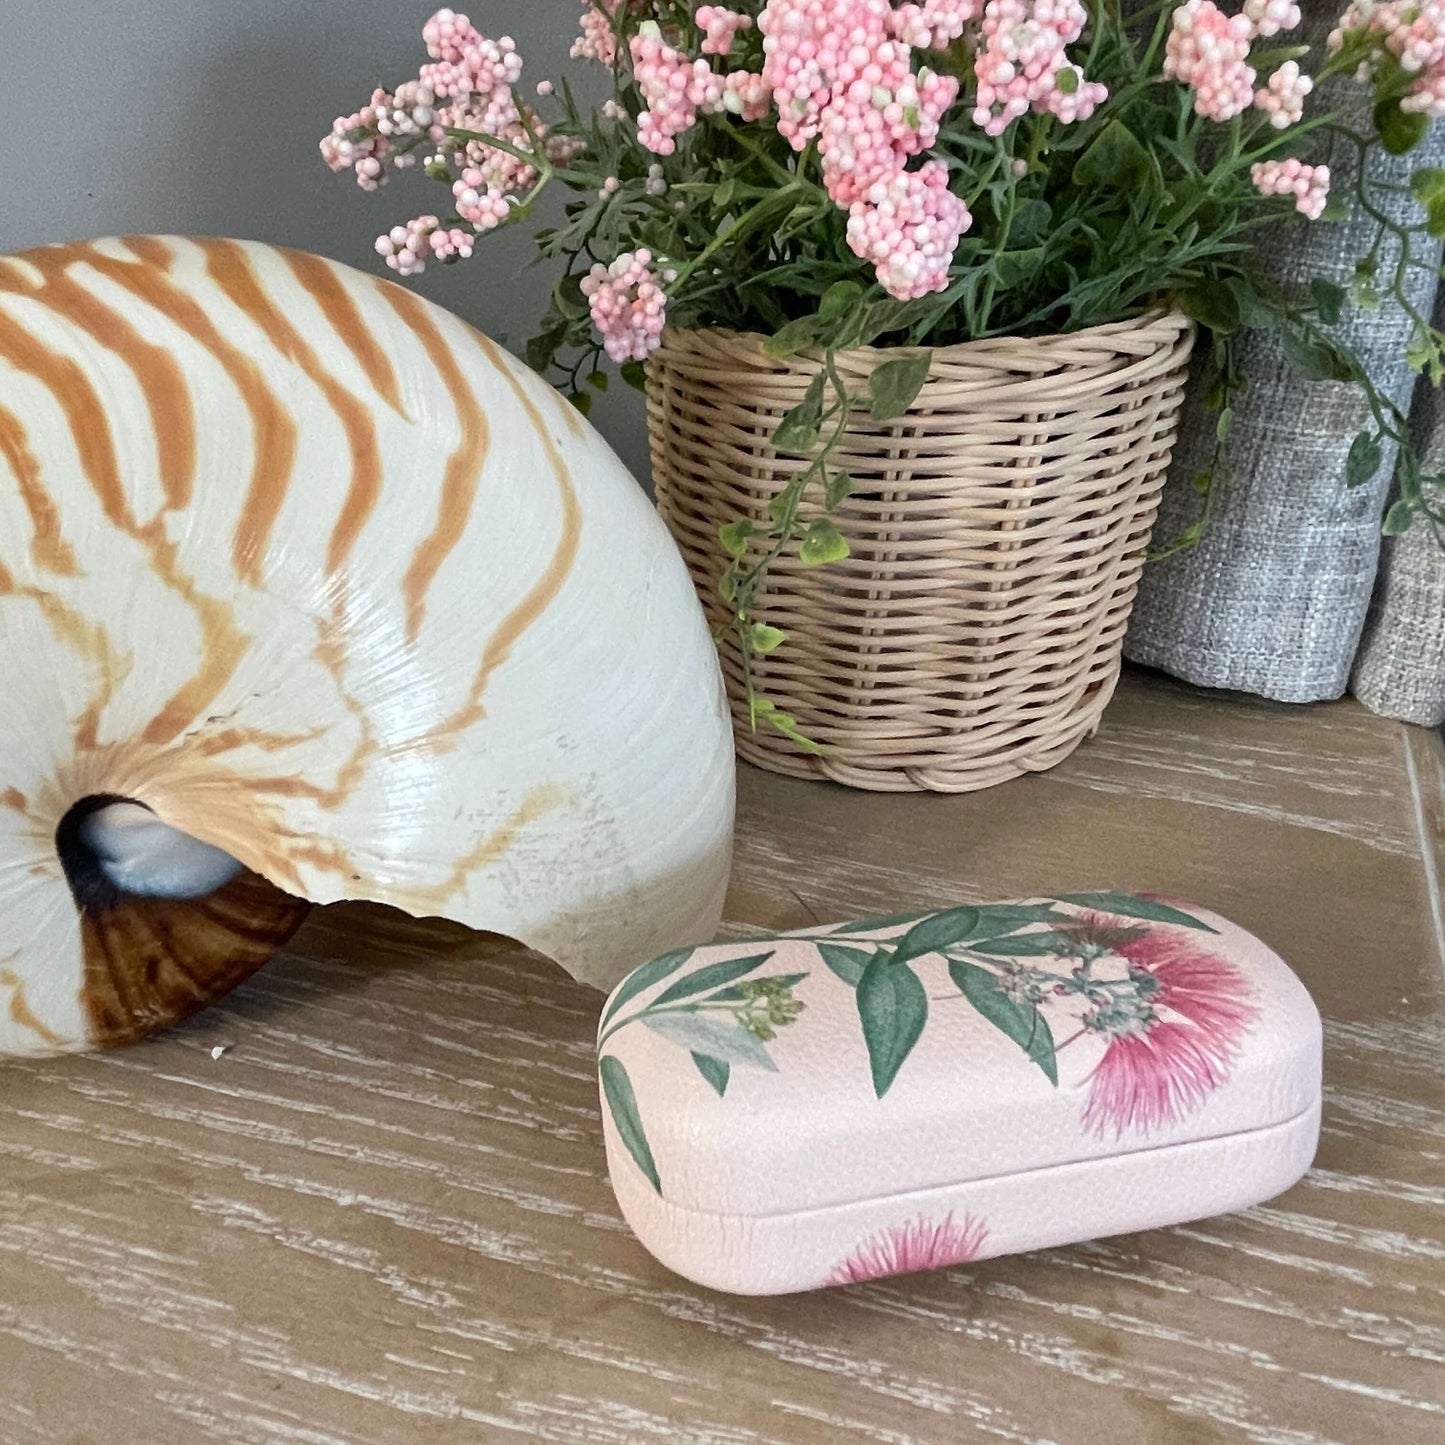 Small trinket case in pale pink with Pohutukawa flowers on it sitting on a table with a large shell and faux pot plant.